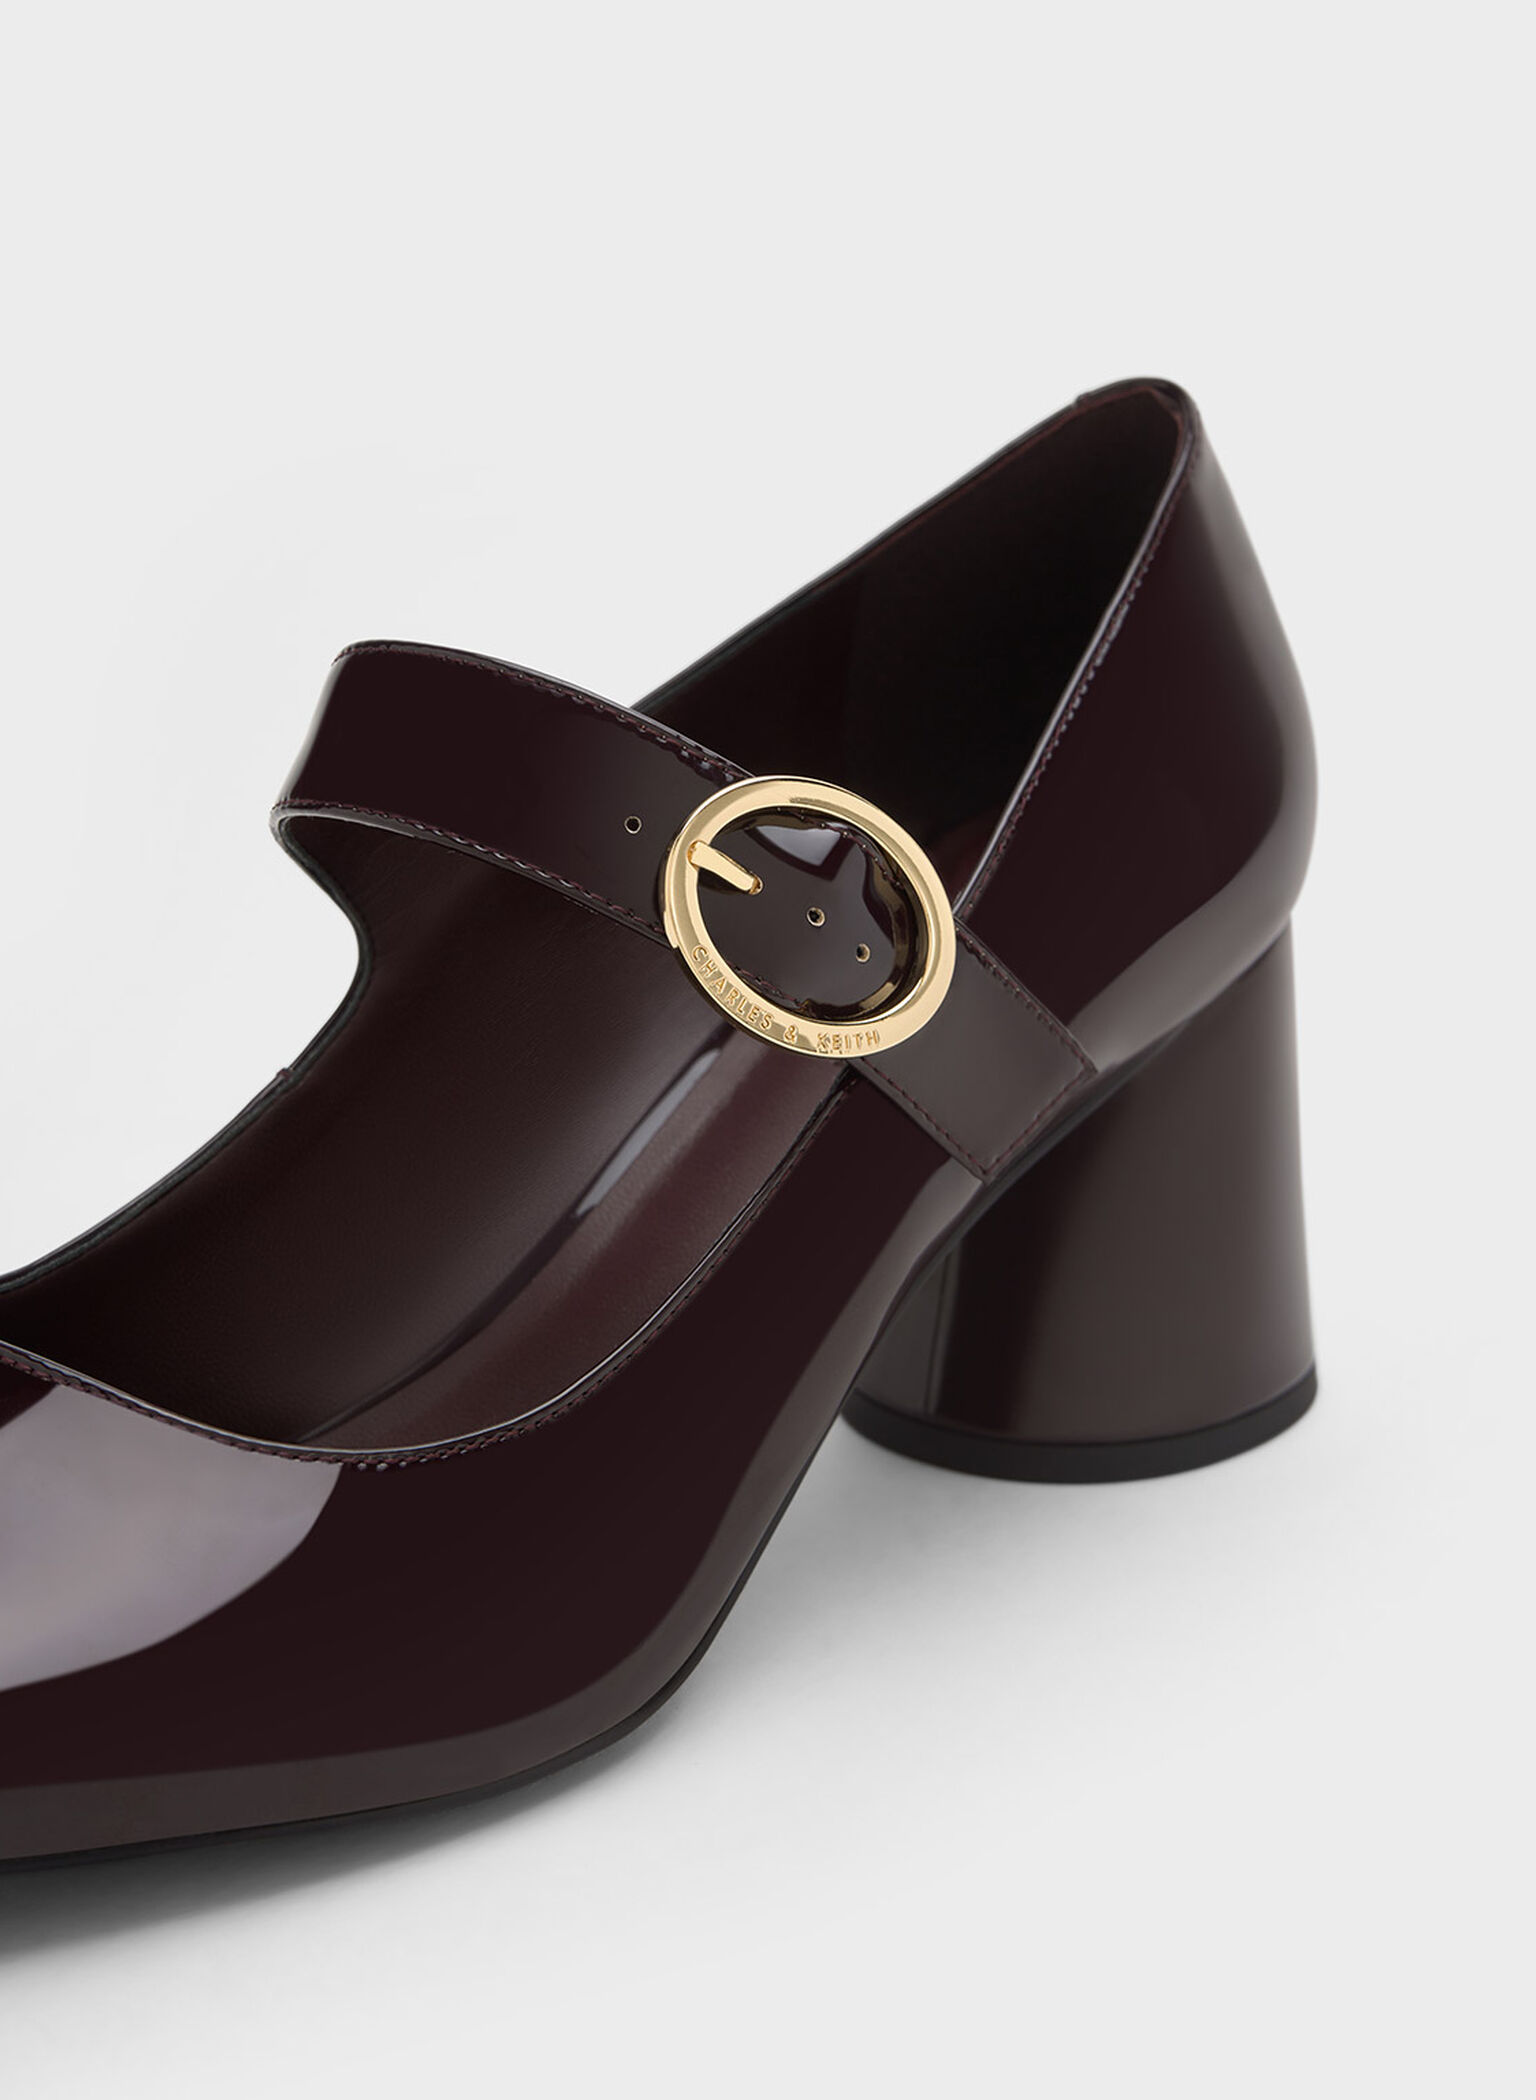 Patent Cylindrical Block Heel Mary Janes, Maroon, hi-res